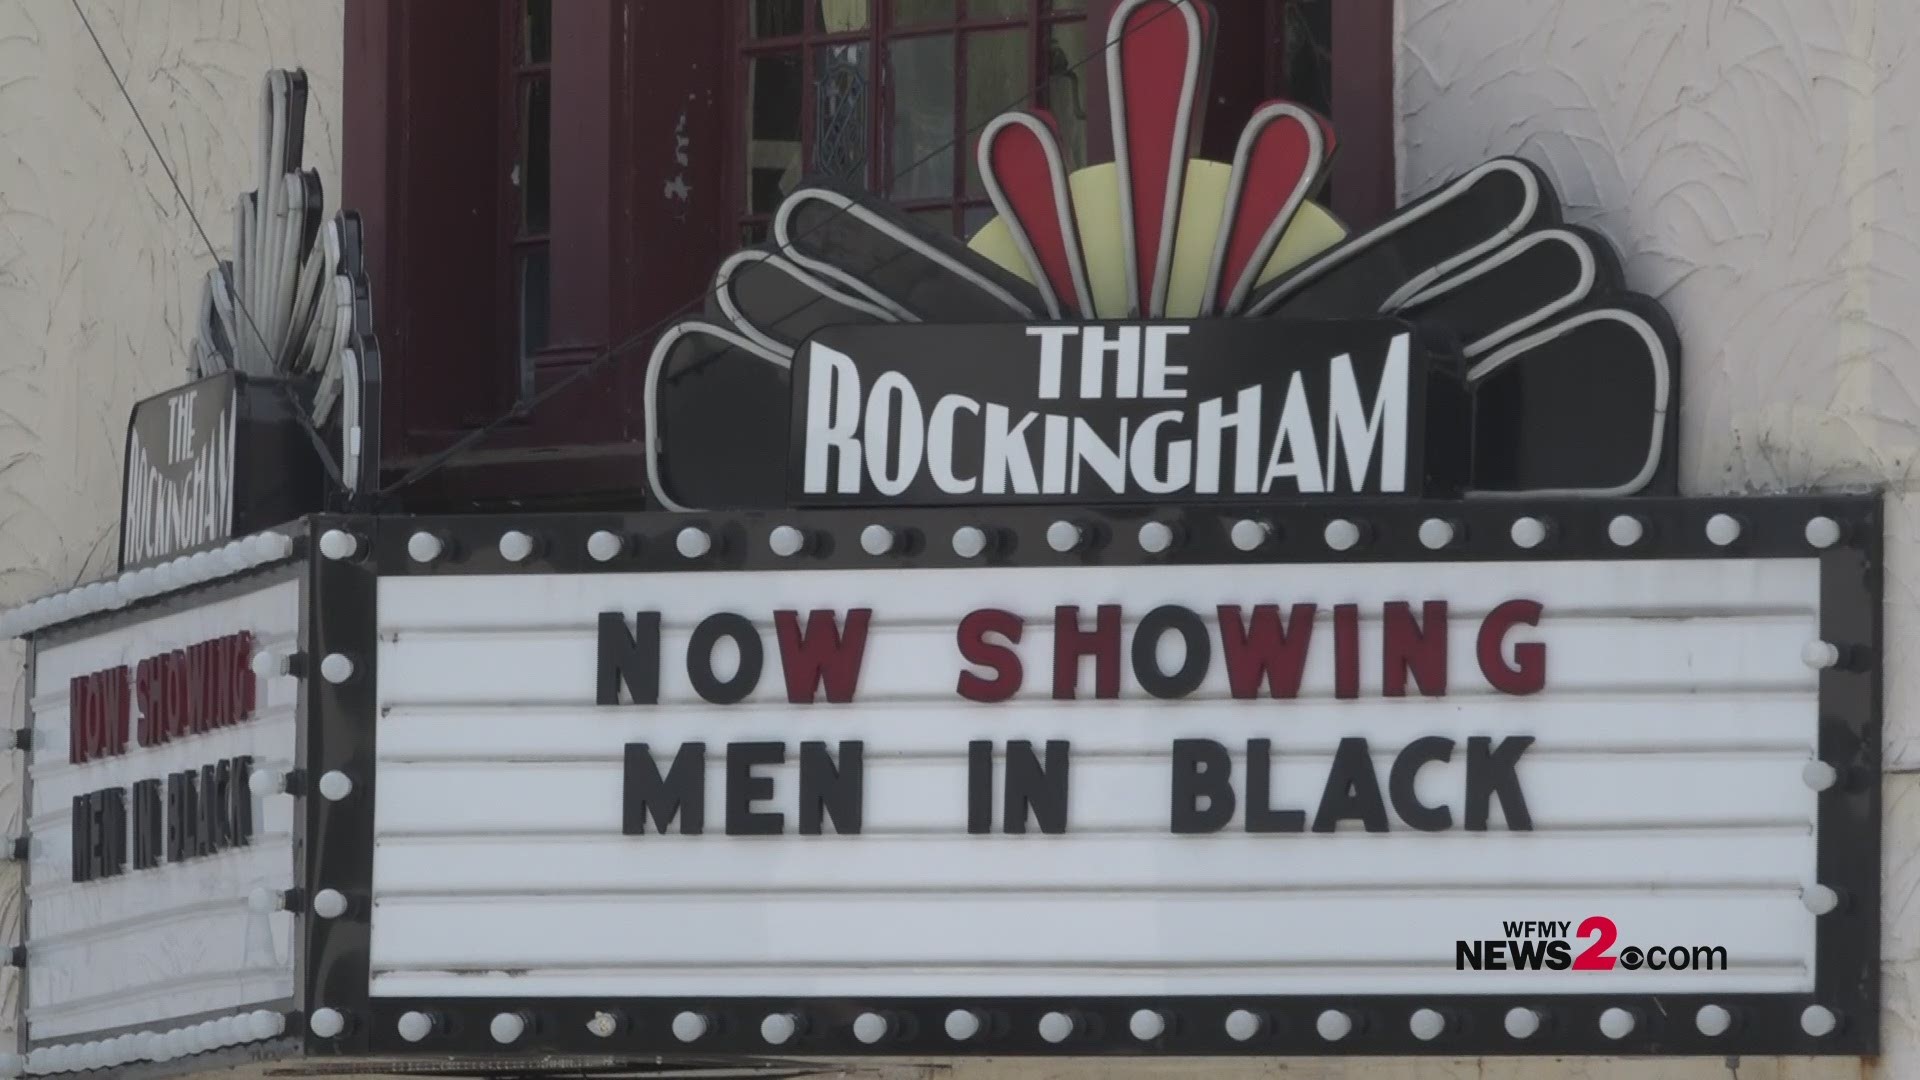 Reidsville city officials said the two owners plan to have shows at the theatre by the start of 2021.